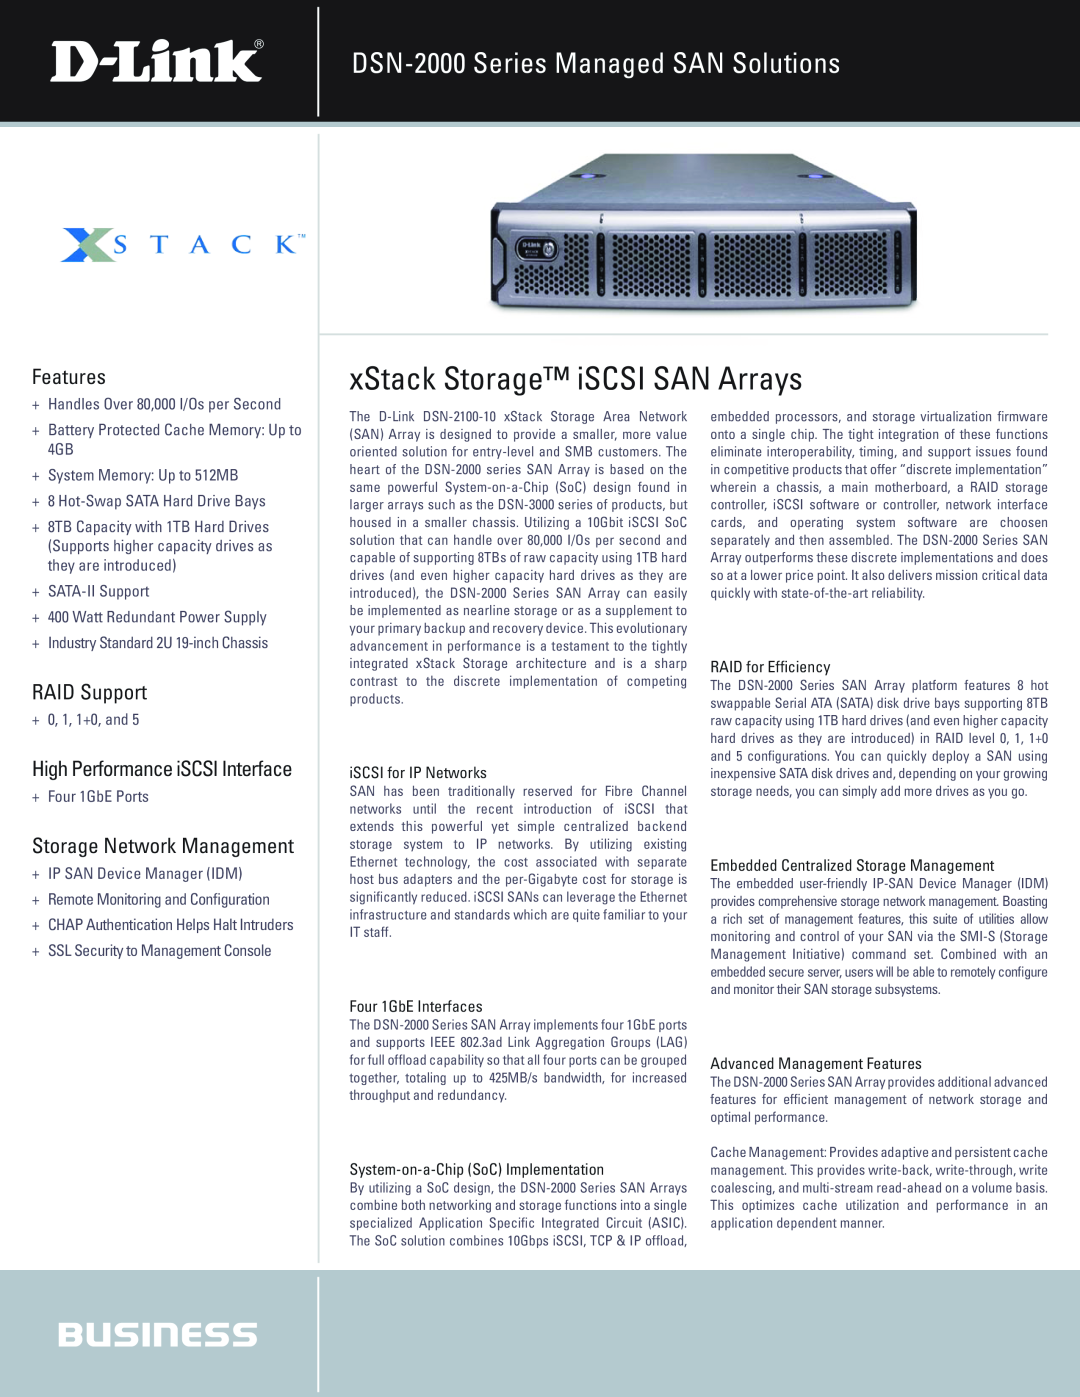 D-Link manual xStack Storage iSCSI SAN Arrays, DSN-2000 Series Managed SAN Solutions, Features, RAID Support 